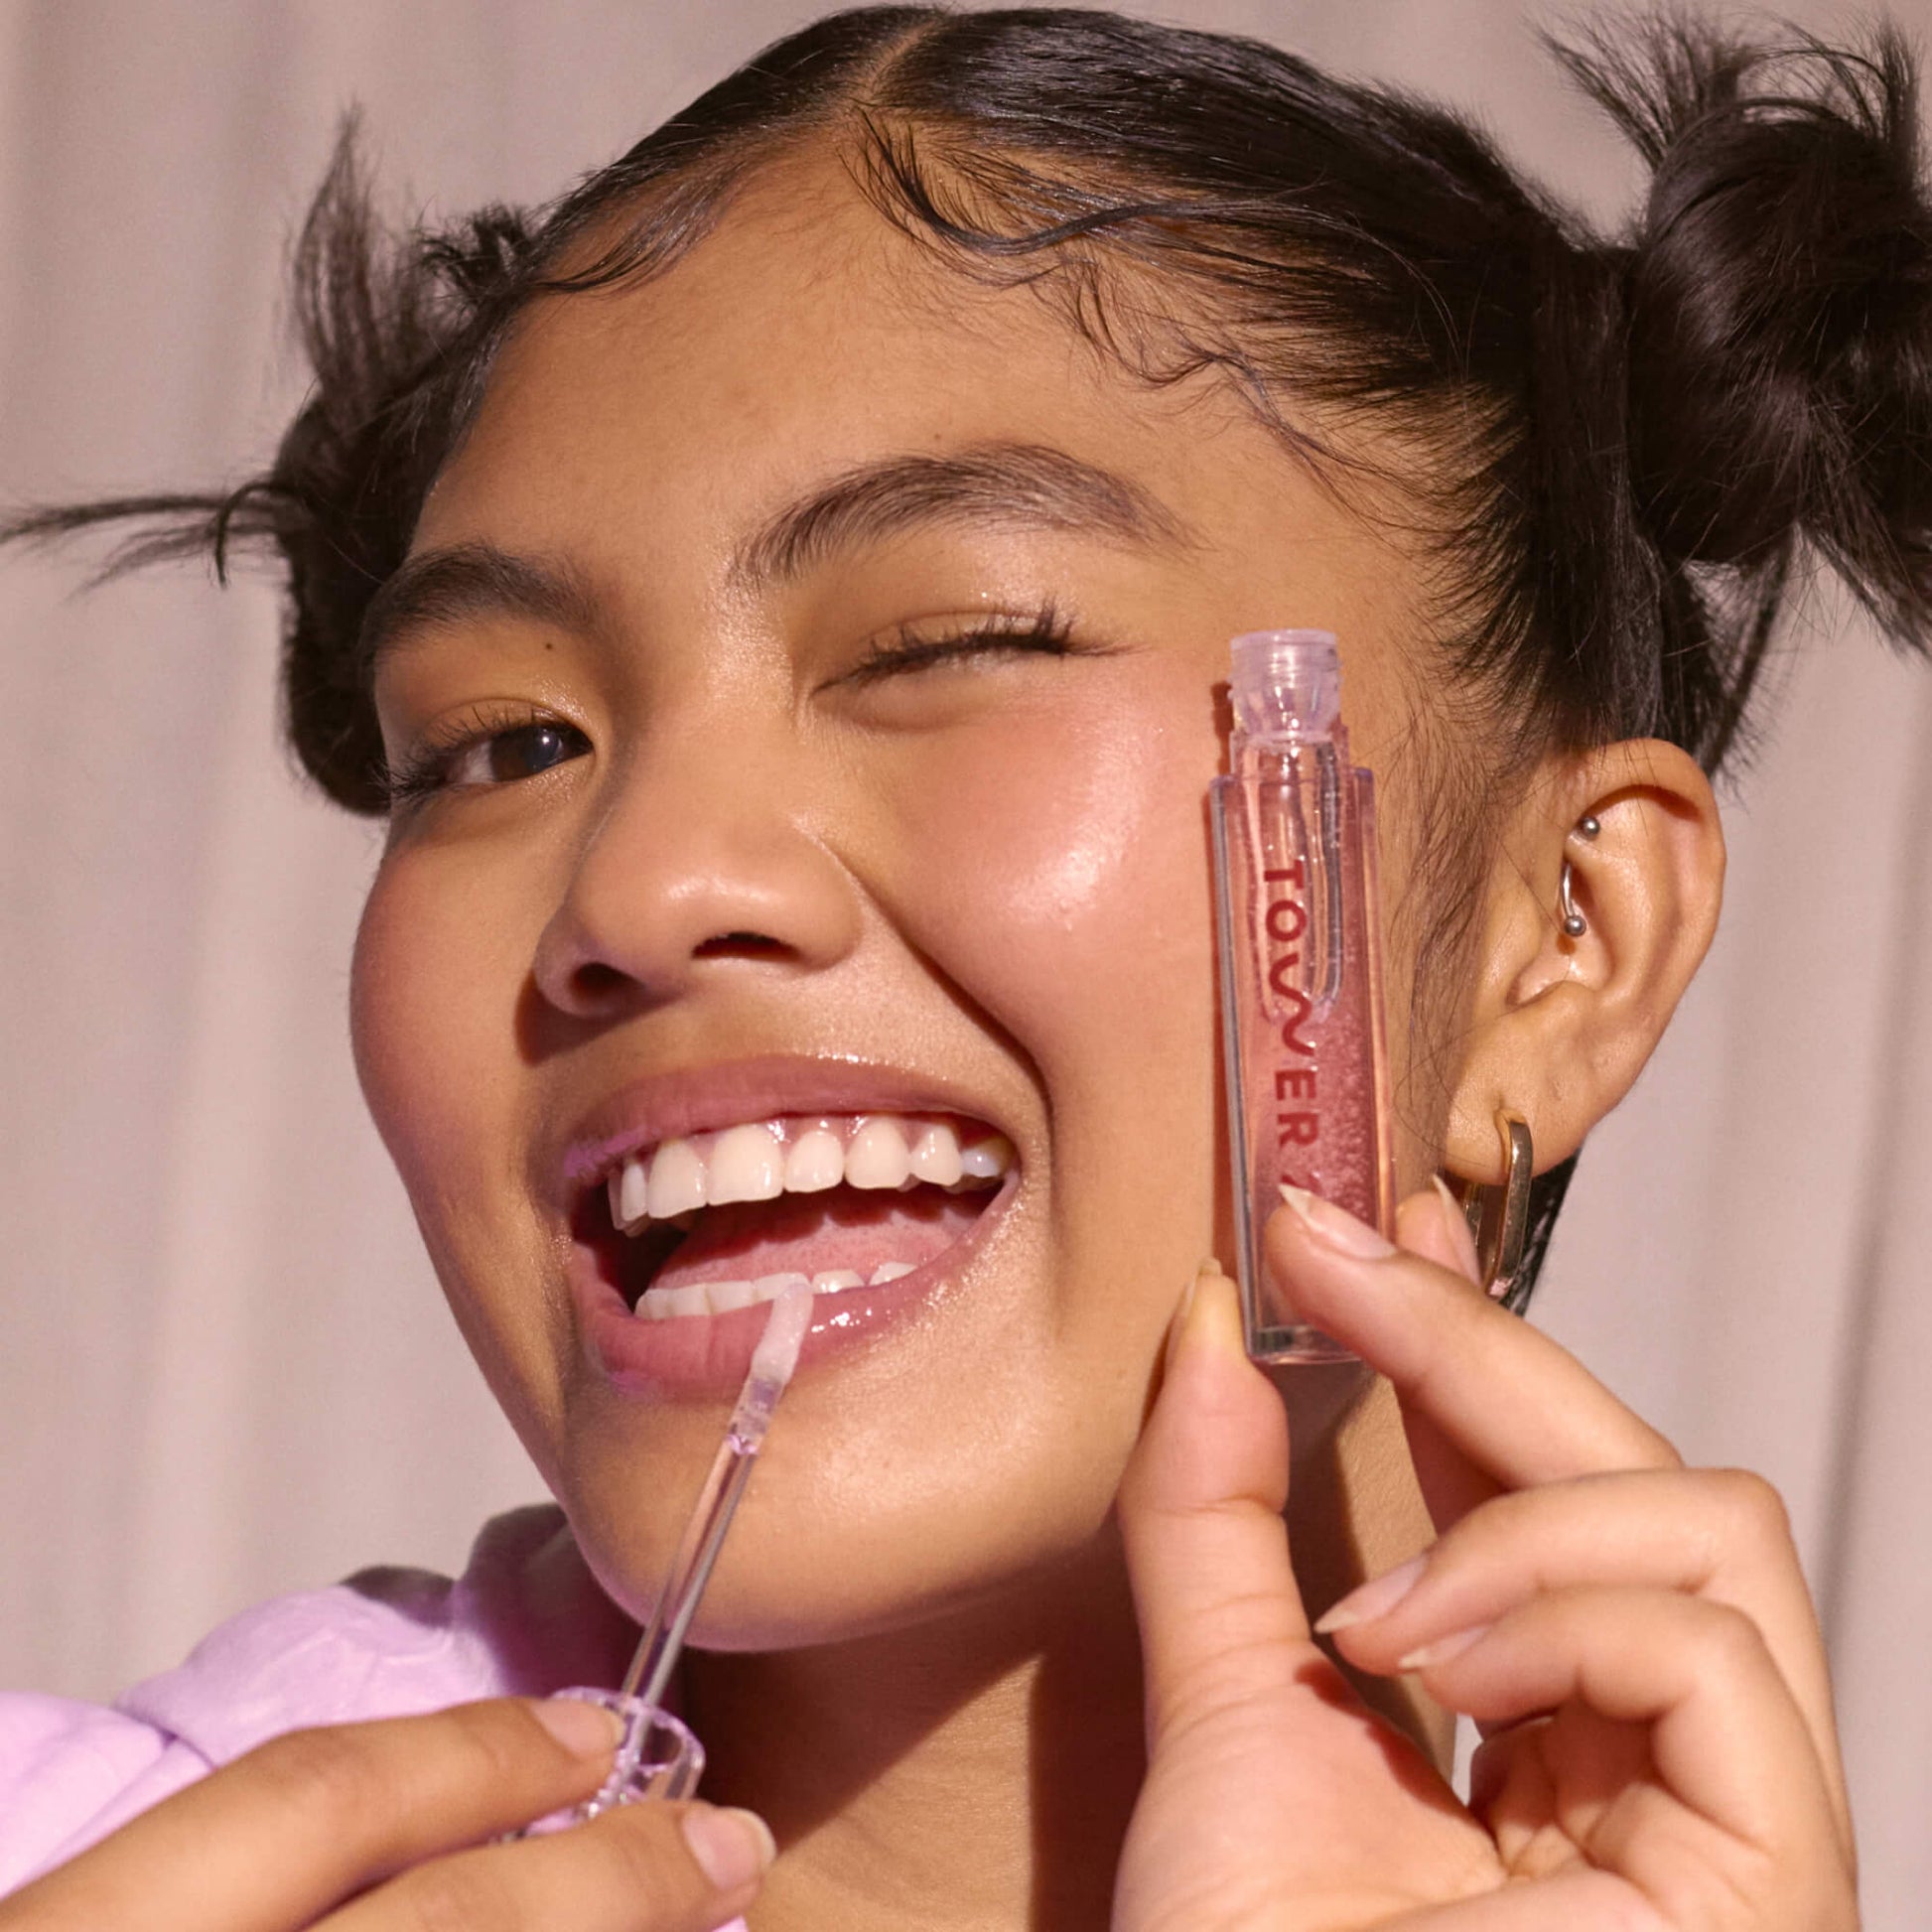 Shared: Model applying Limited Edition ShineOn Lip Jelly "Lip Drip Duo" featuring the shade Chill